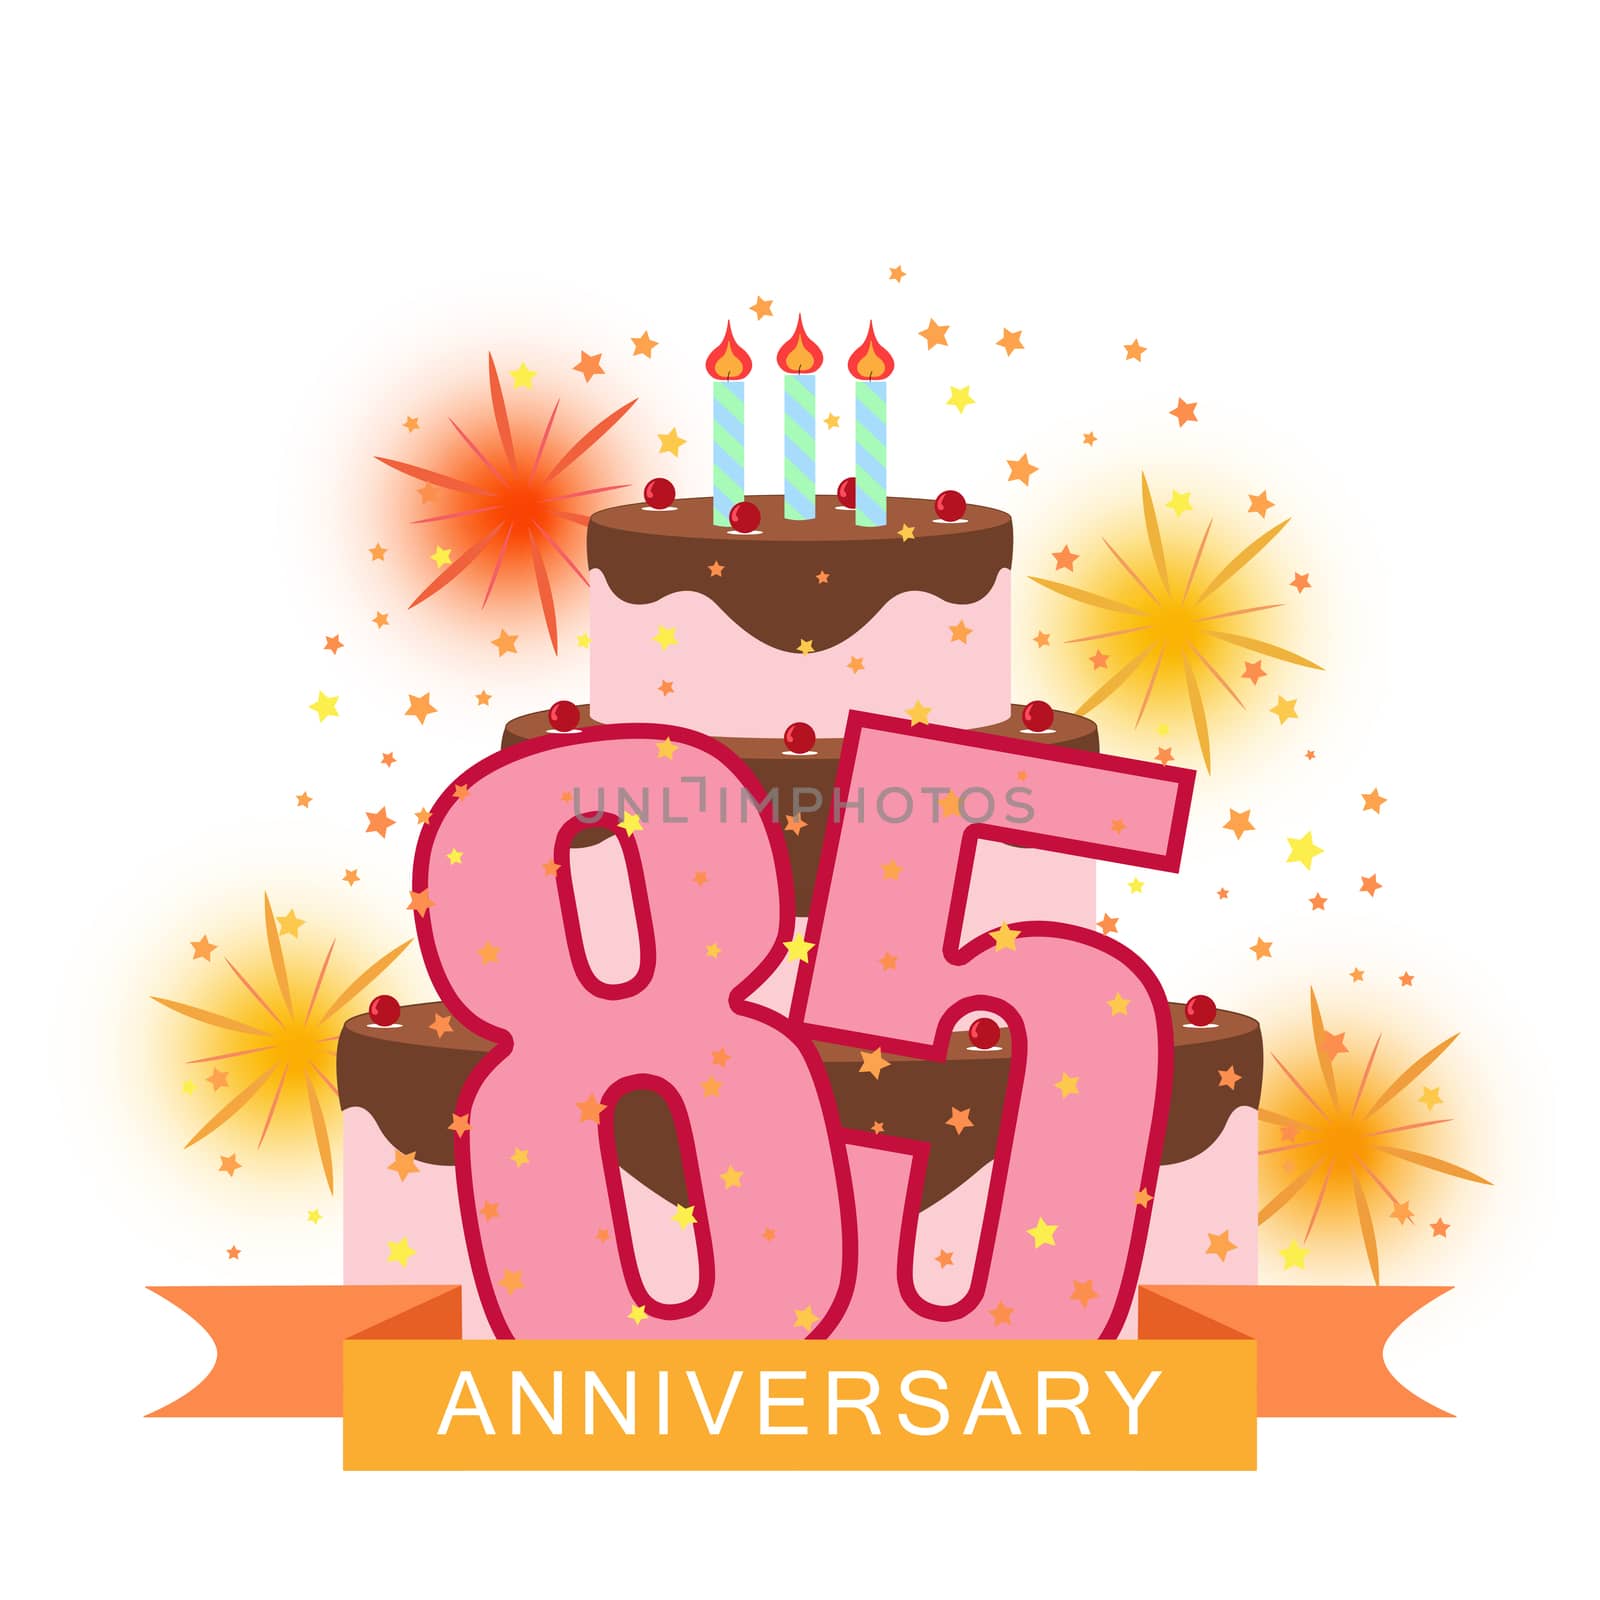 Illustrated image with a cake numbering eighty-five, fireworks a by Grommik